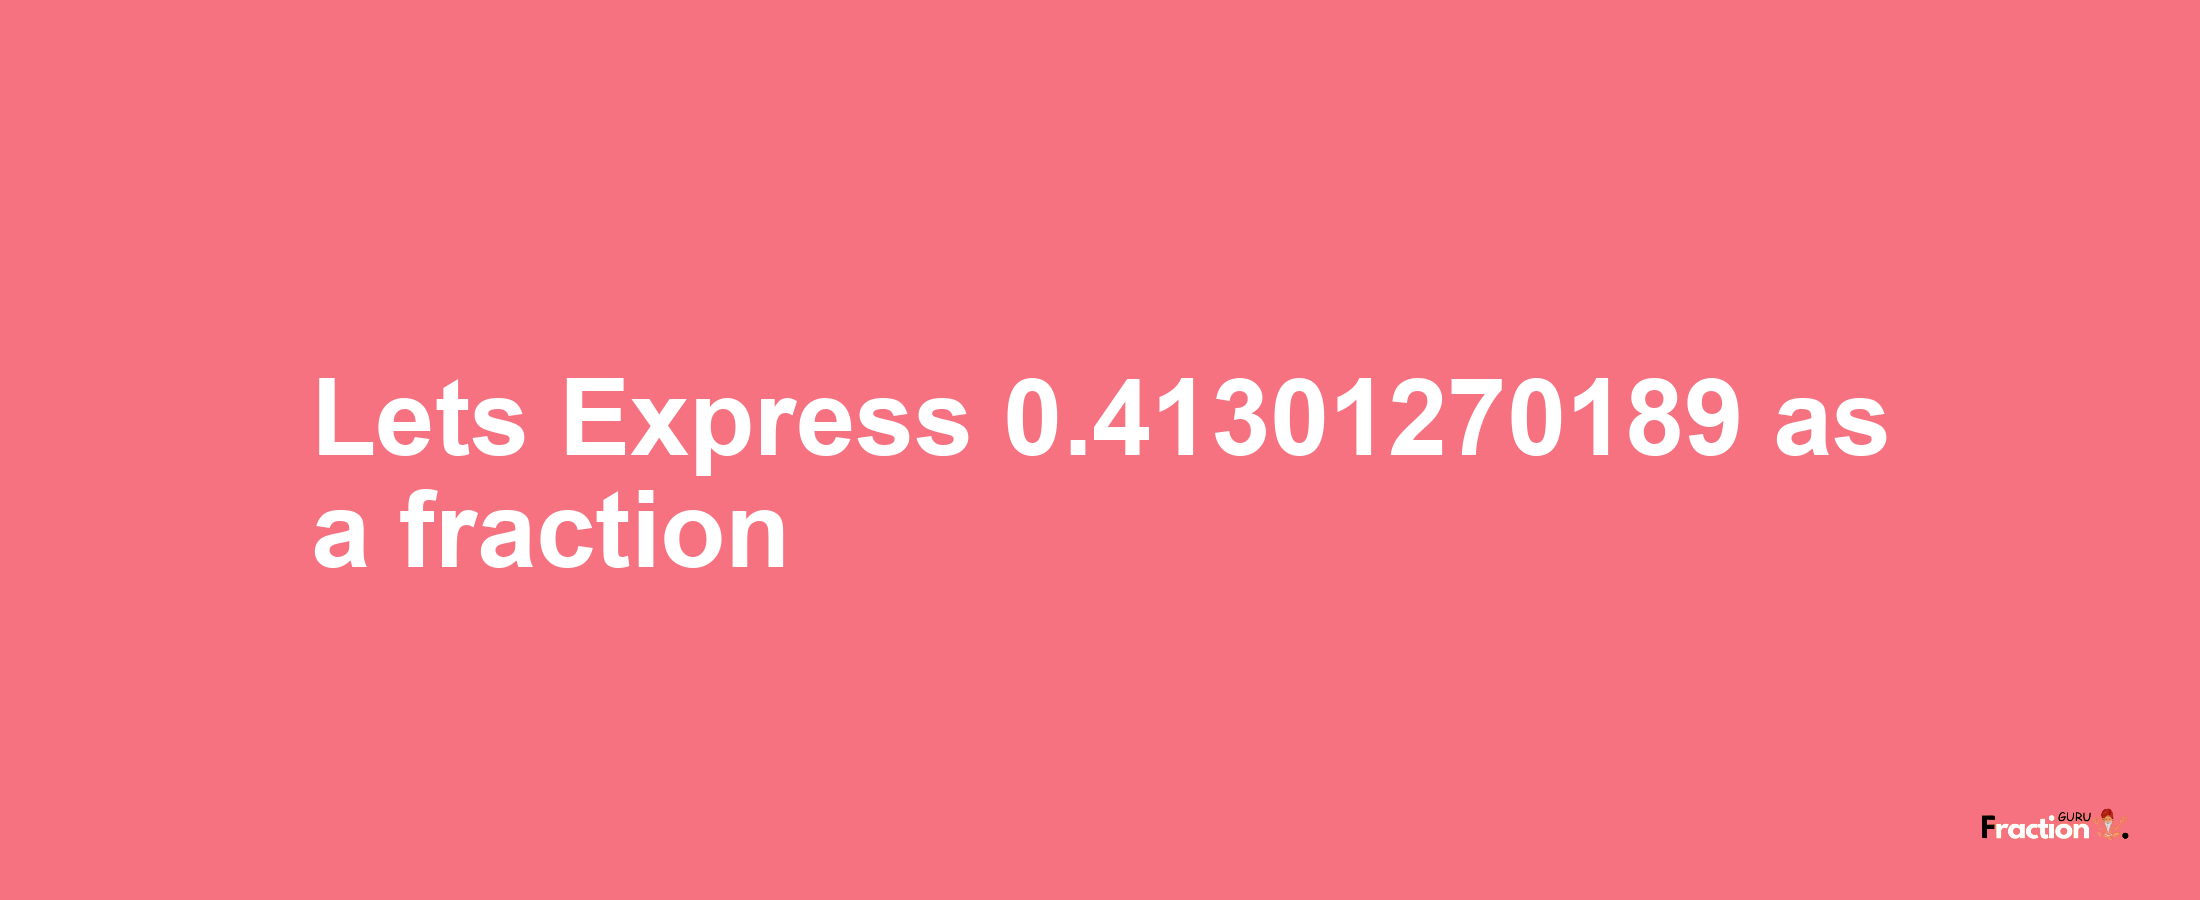 Lets Express 0.41301270189 as afraction